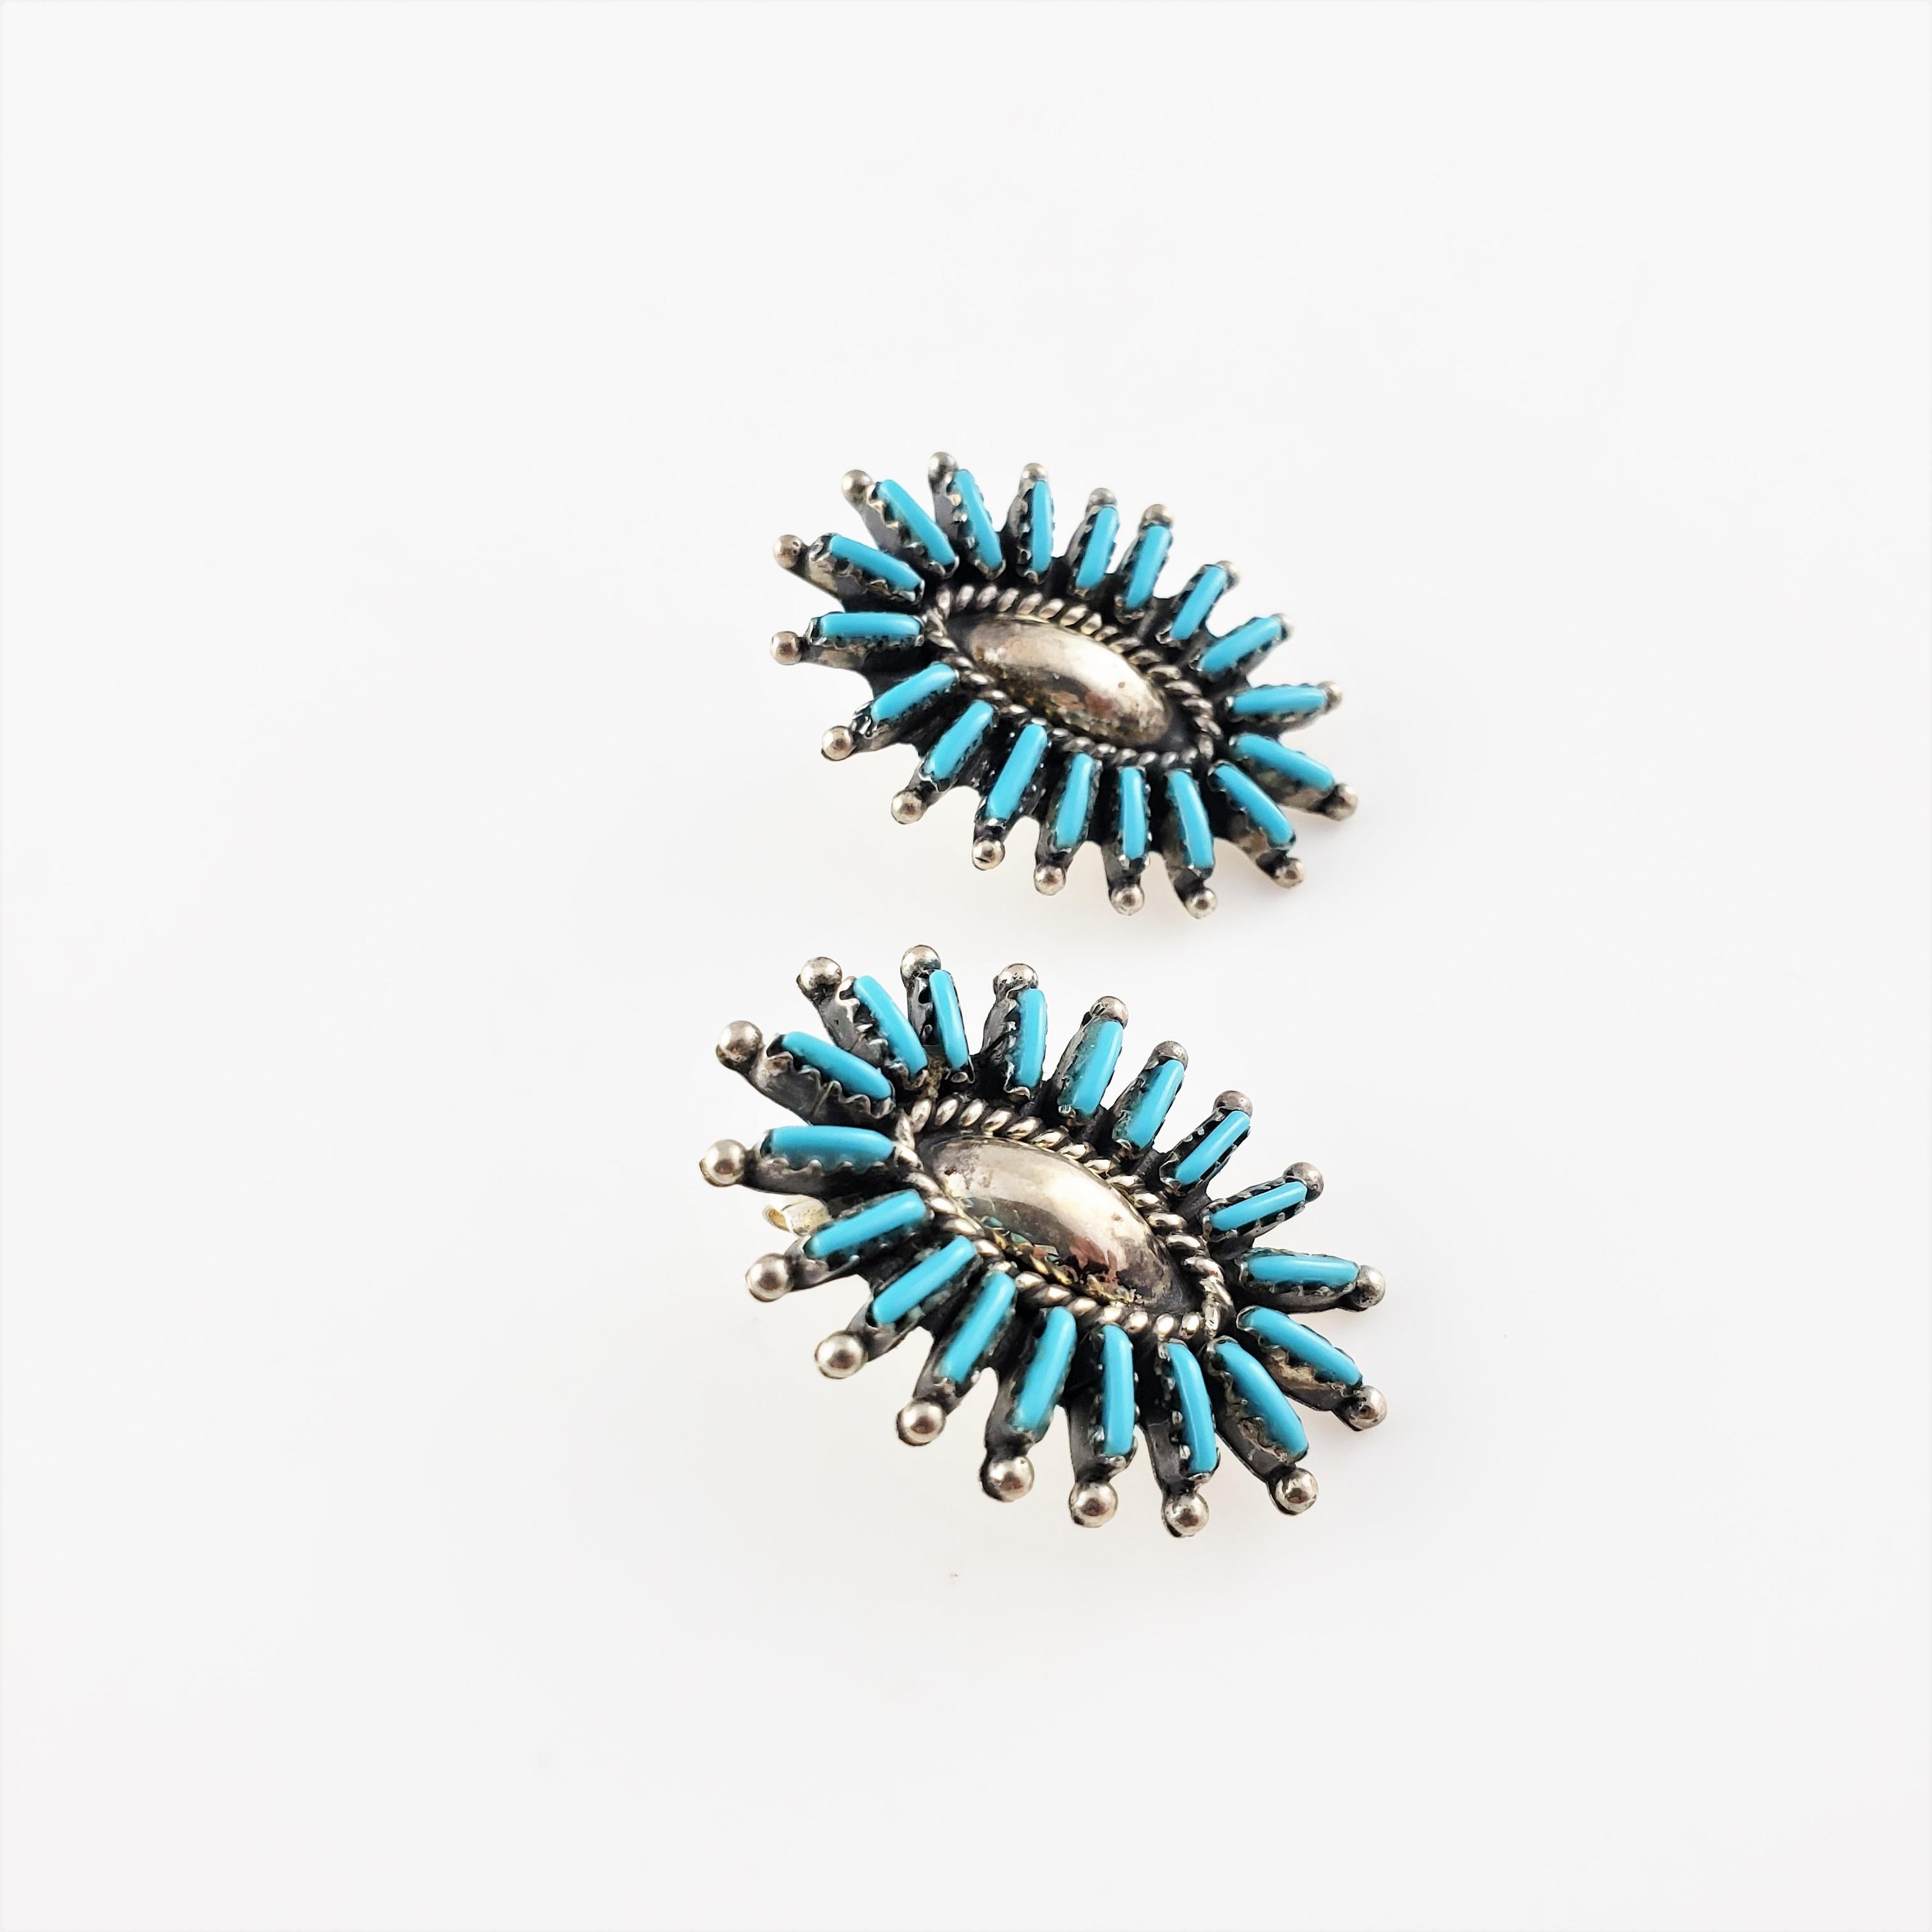 Vintage Native American Signed LA Sterling Silver Needlepoint Turquoise Earrings-

These lovely Native American earrings are decorated with needlepoint turquoise stones (5 mm x 1 mm each) set in beautifully detailed sterling silver. Push back